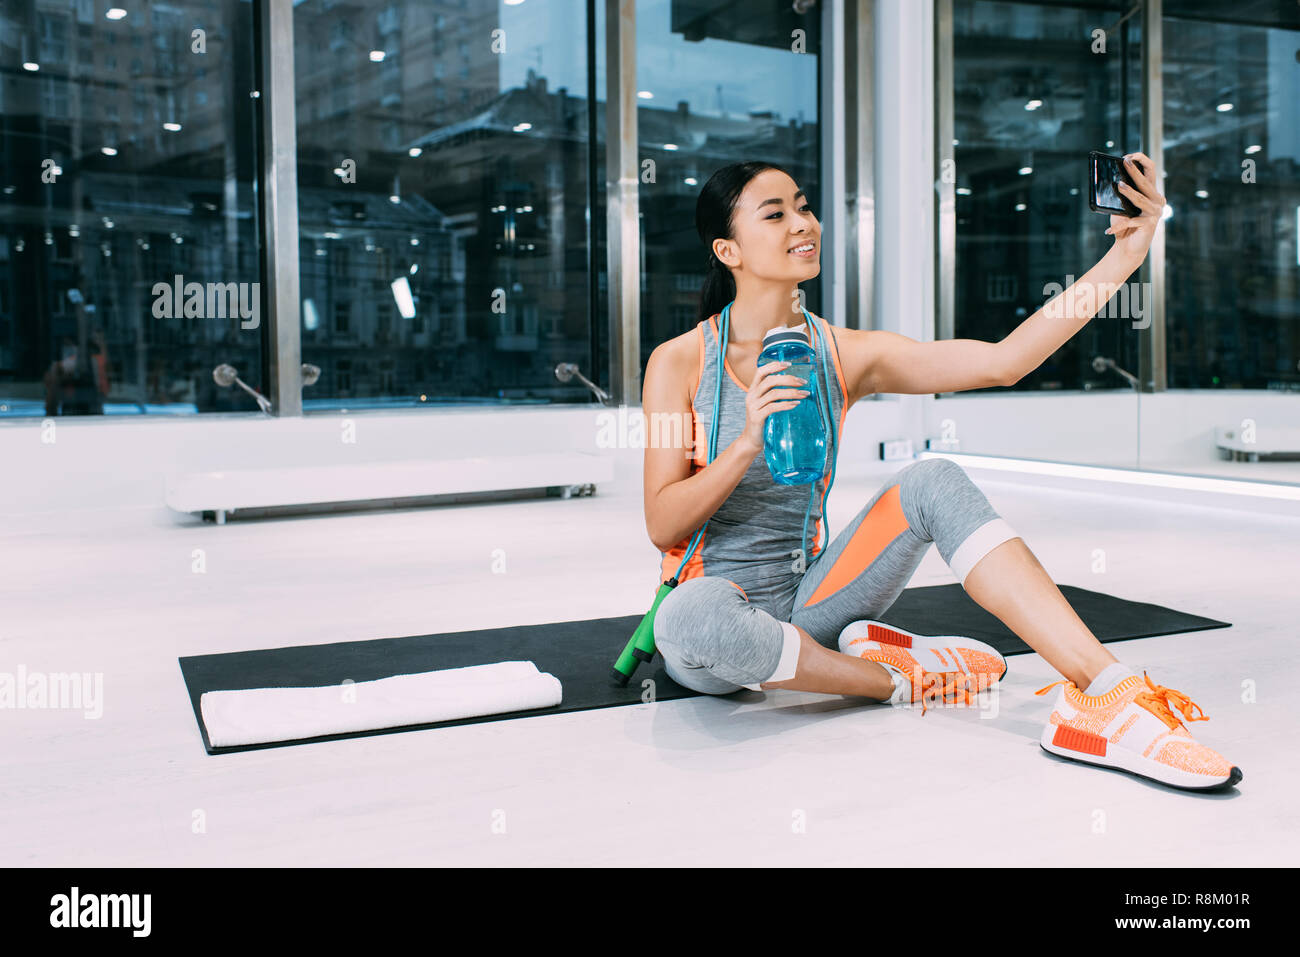 Young Fit Woman Making A Selfie In Gym After Exercise Stock Photo